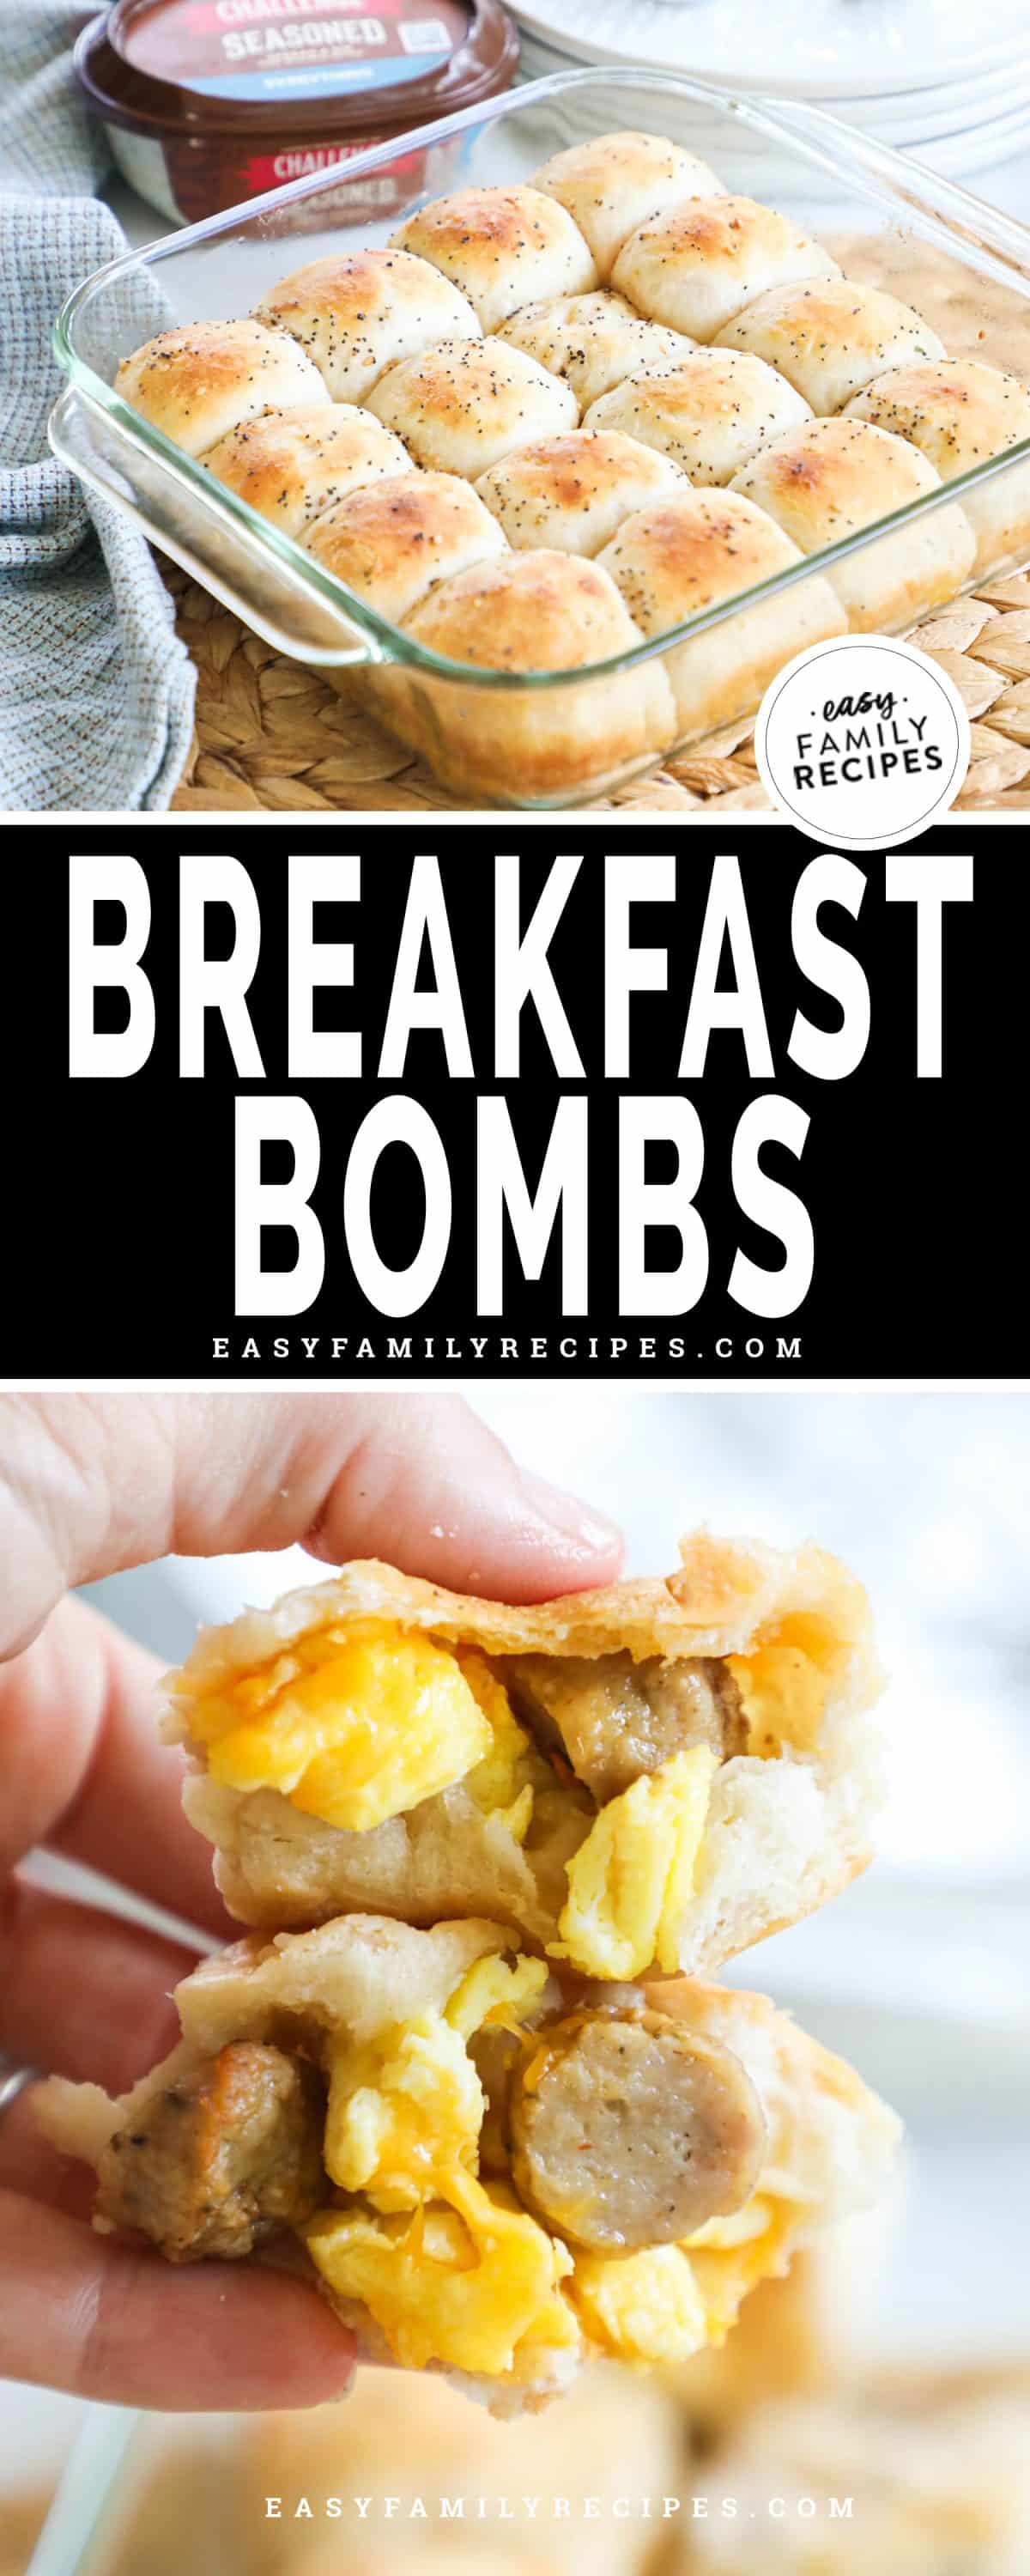 Sausage egg and cheese breakfast bombs opened to see the stuffed filling